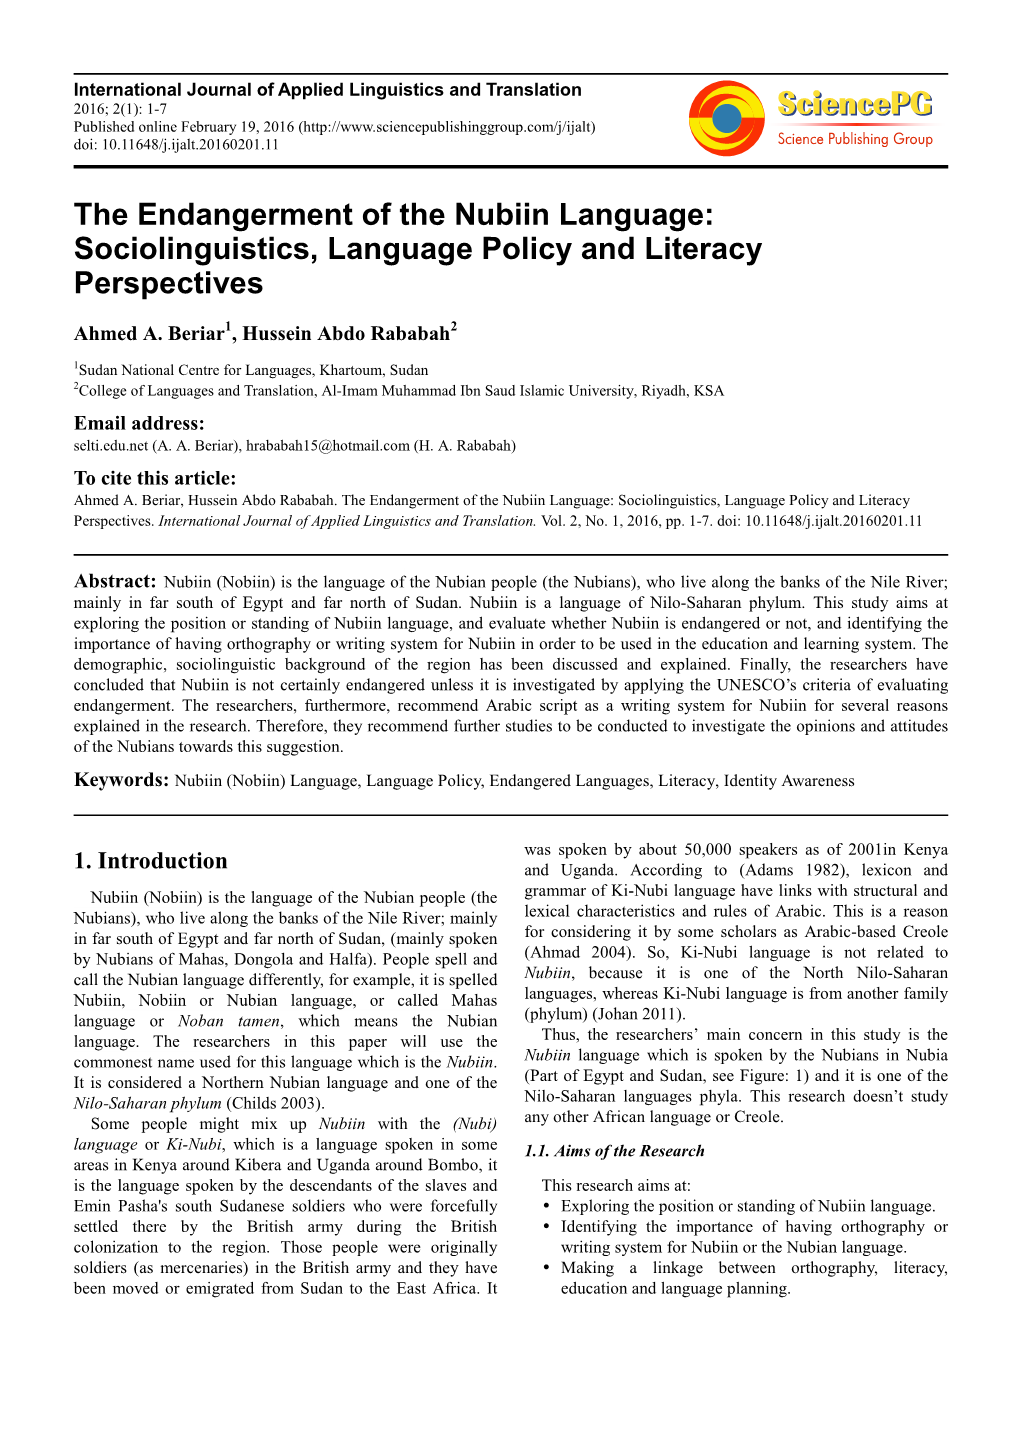 The Endangerment of the Nubiin Language: Sociolinguistics, Language Policy and Literacy Perspectives